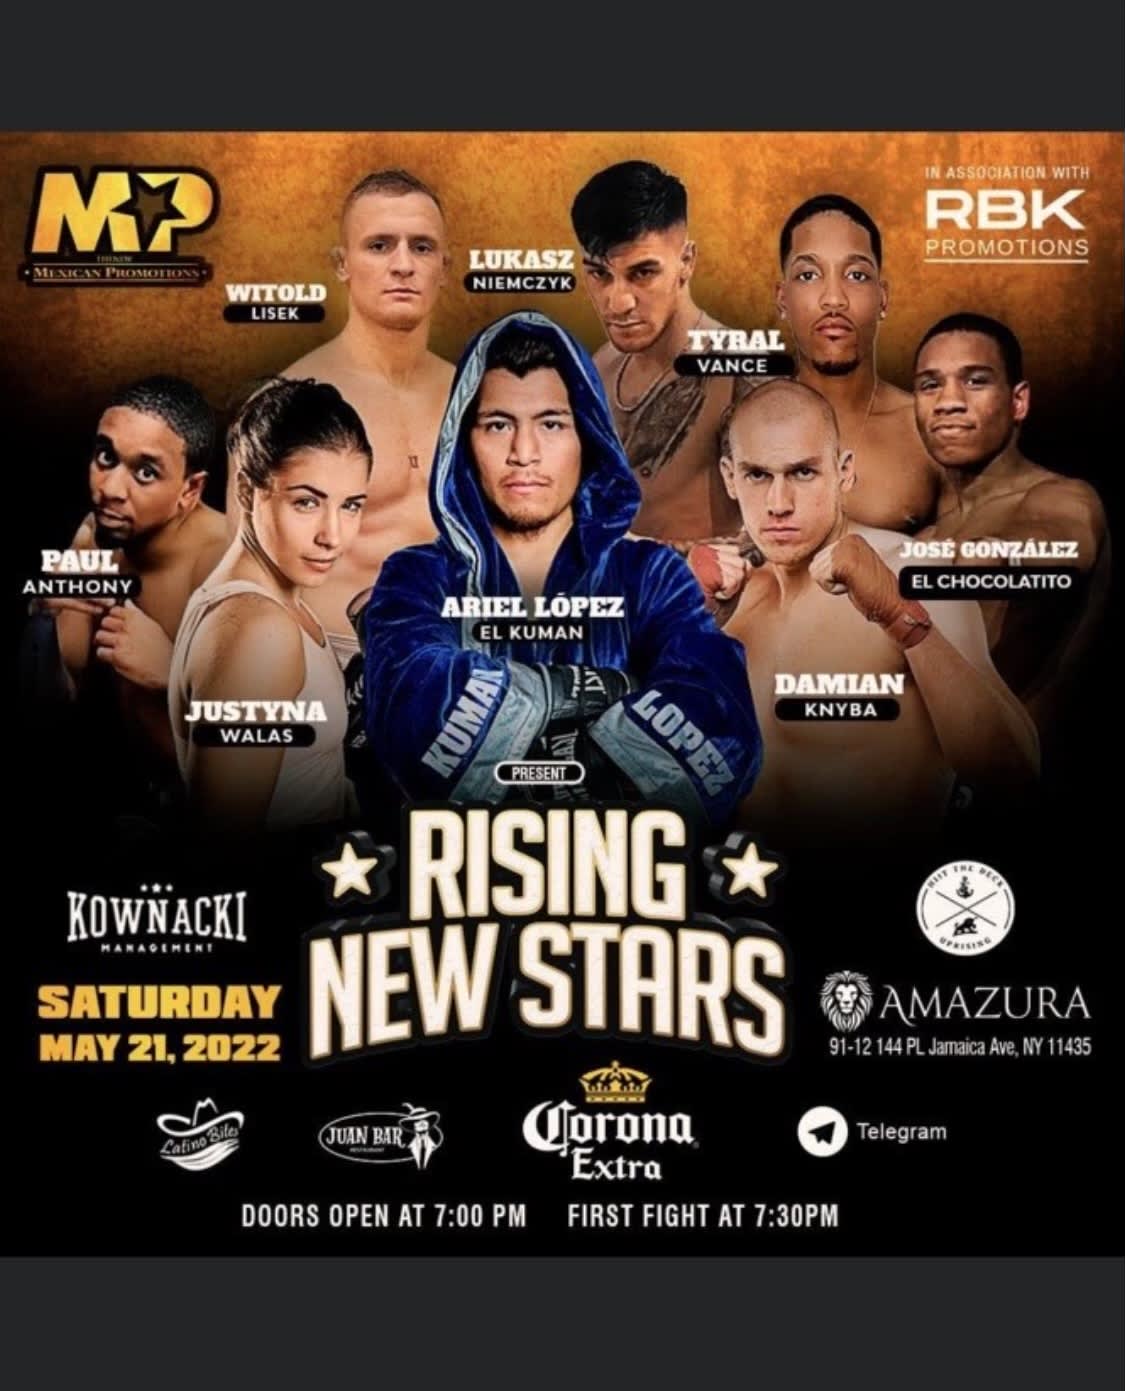 Rising New Stars Presented by Mexican Promotions and Worldwide Bouts Inc